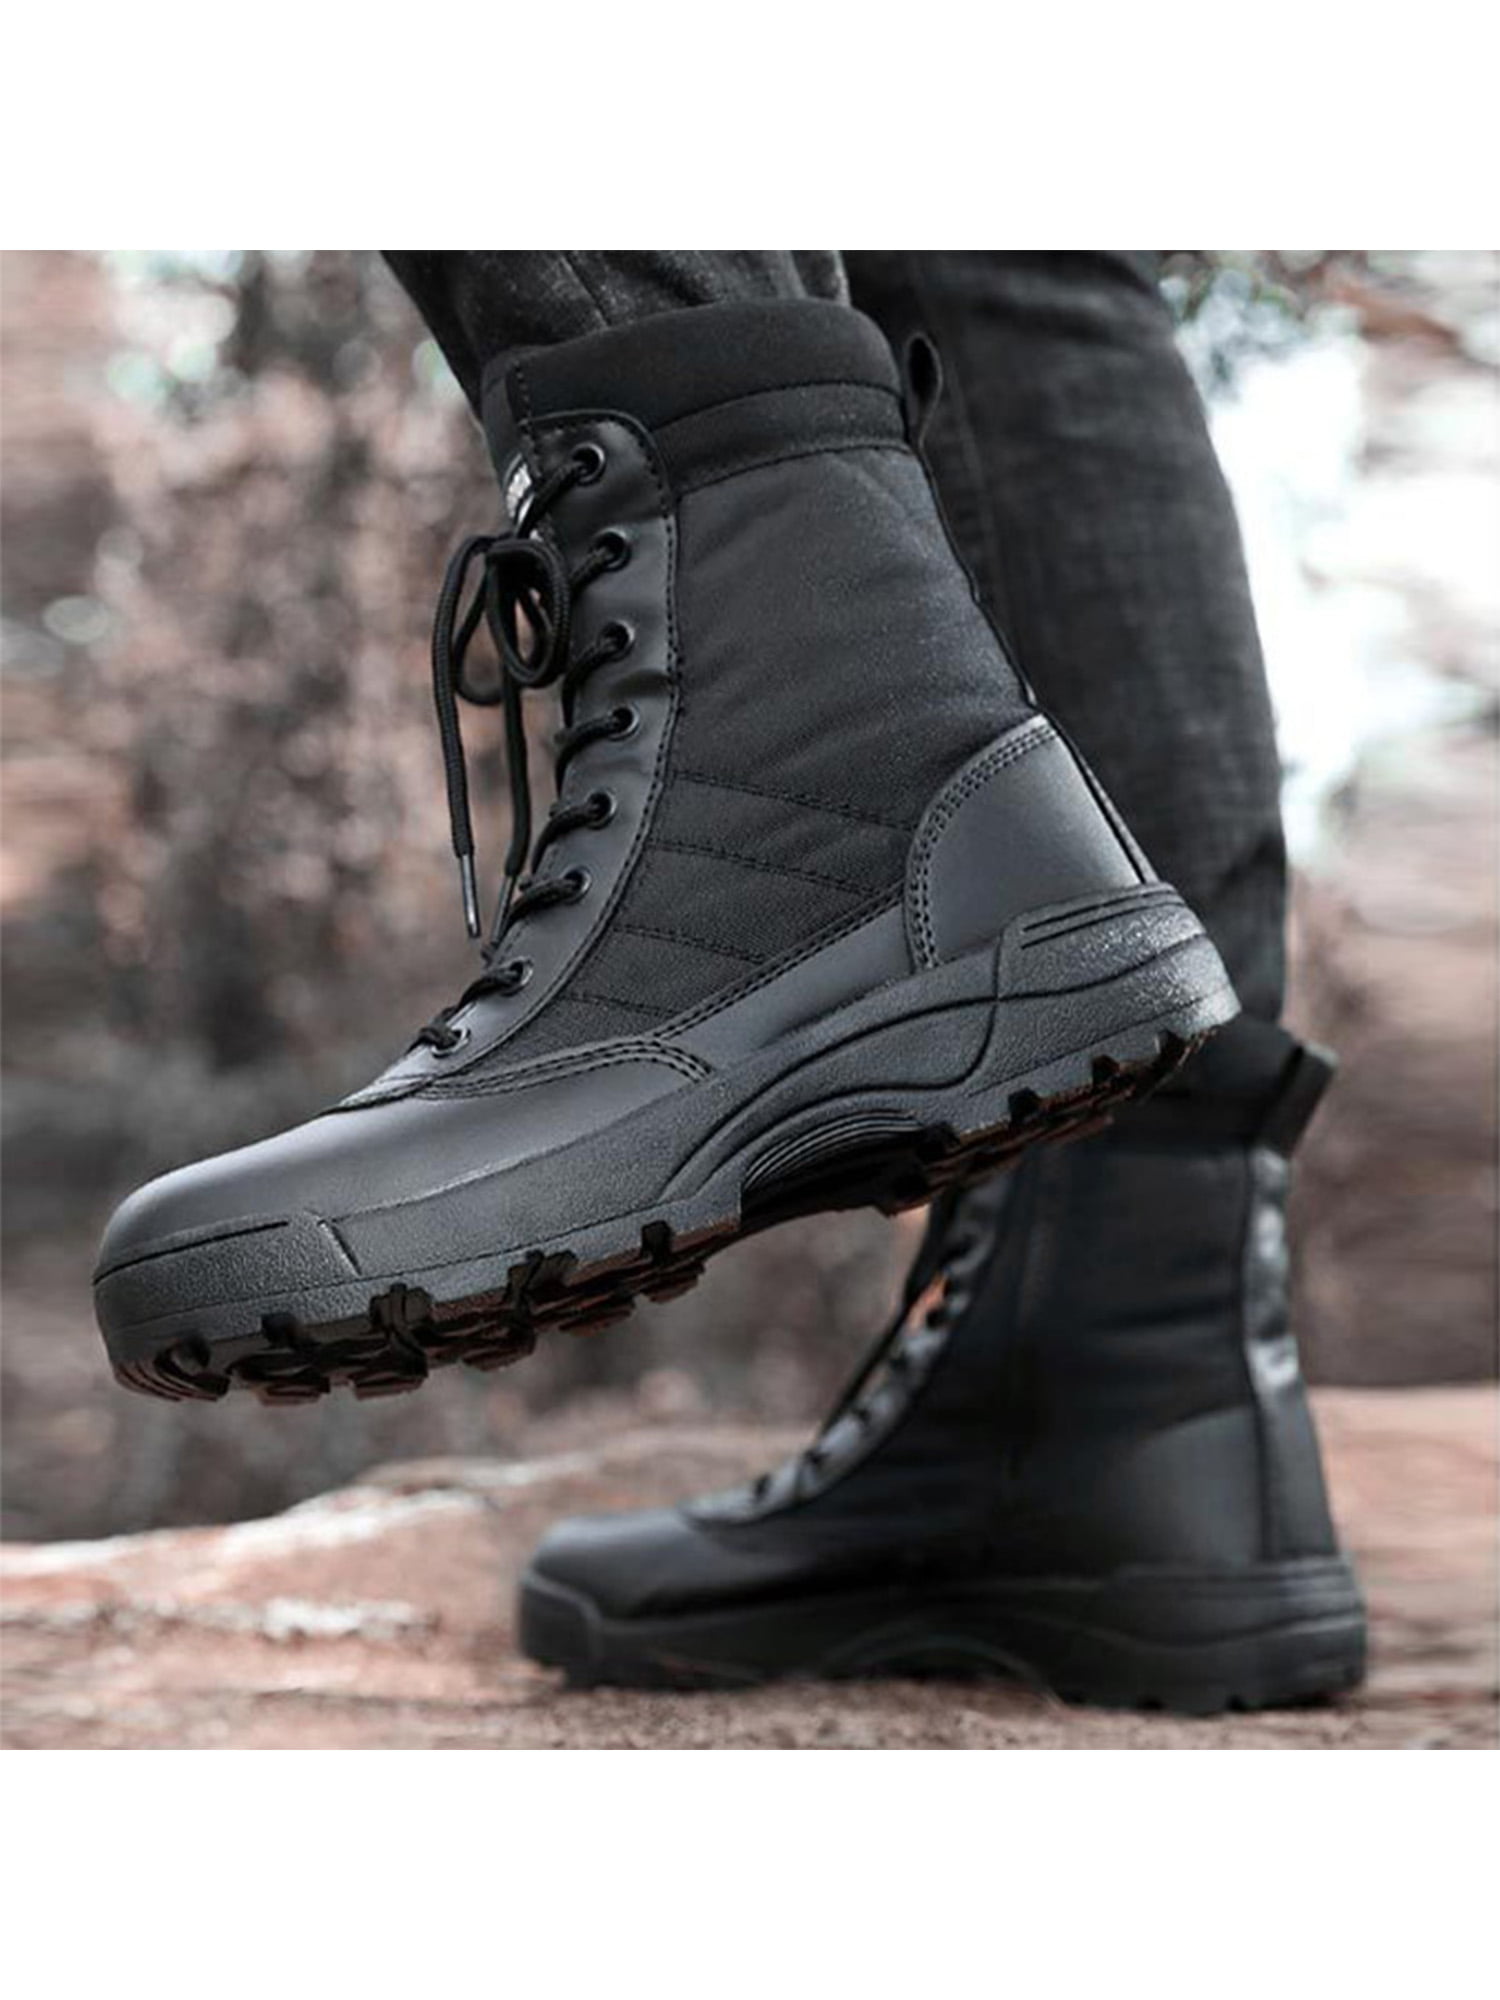 GIRLS SCHOOL BOOTS BIKER ARMY MILITARY FASHION CHELSEA FORMAL WINTER BLACK SHOES 